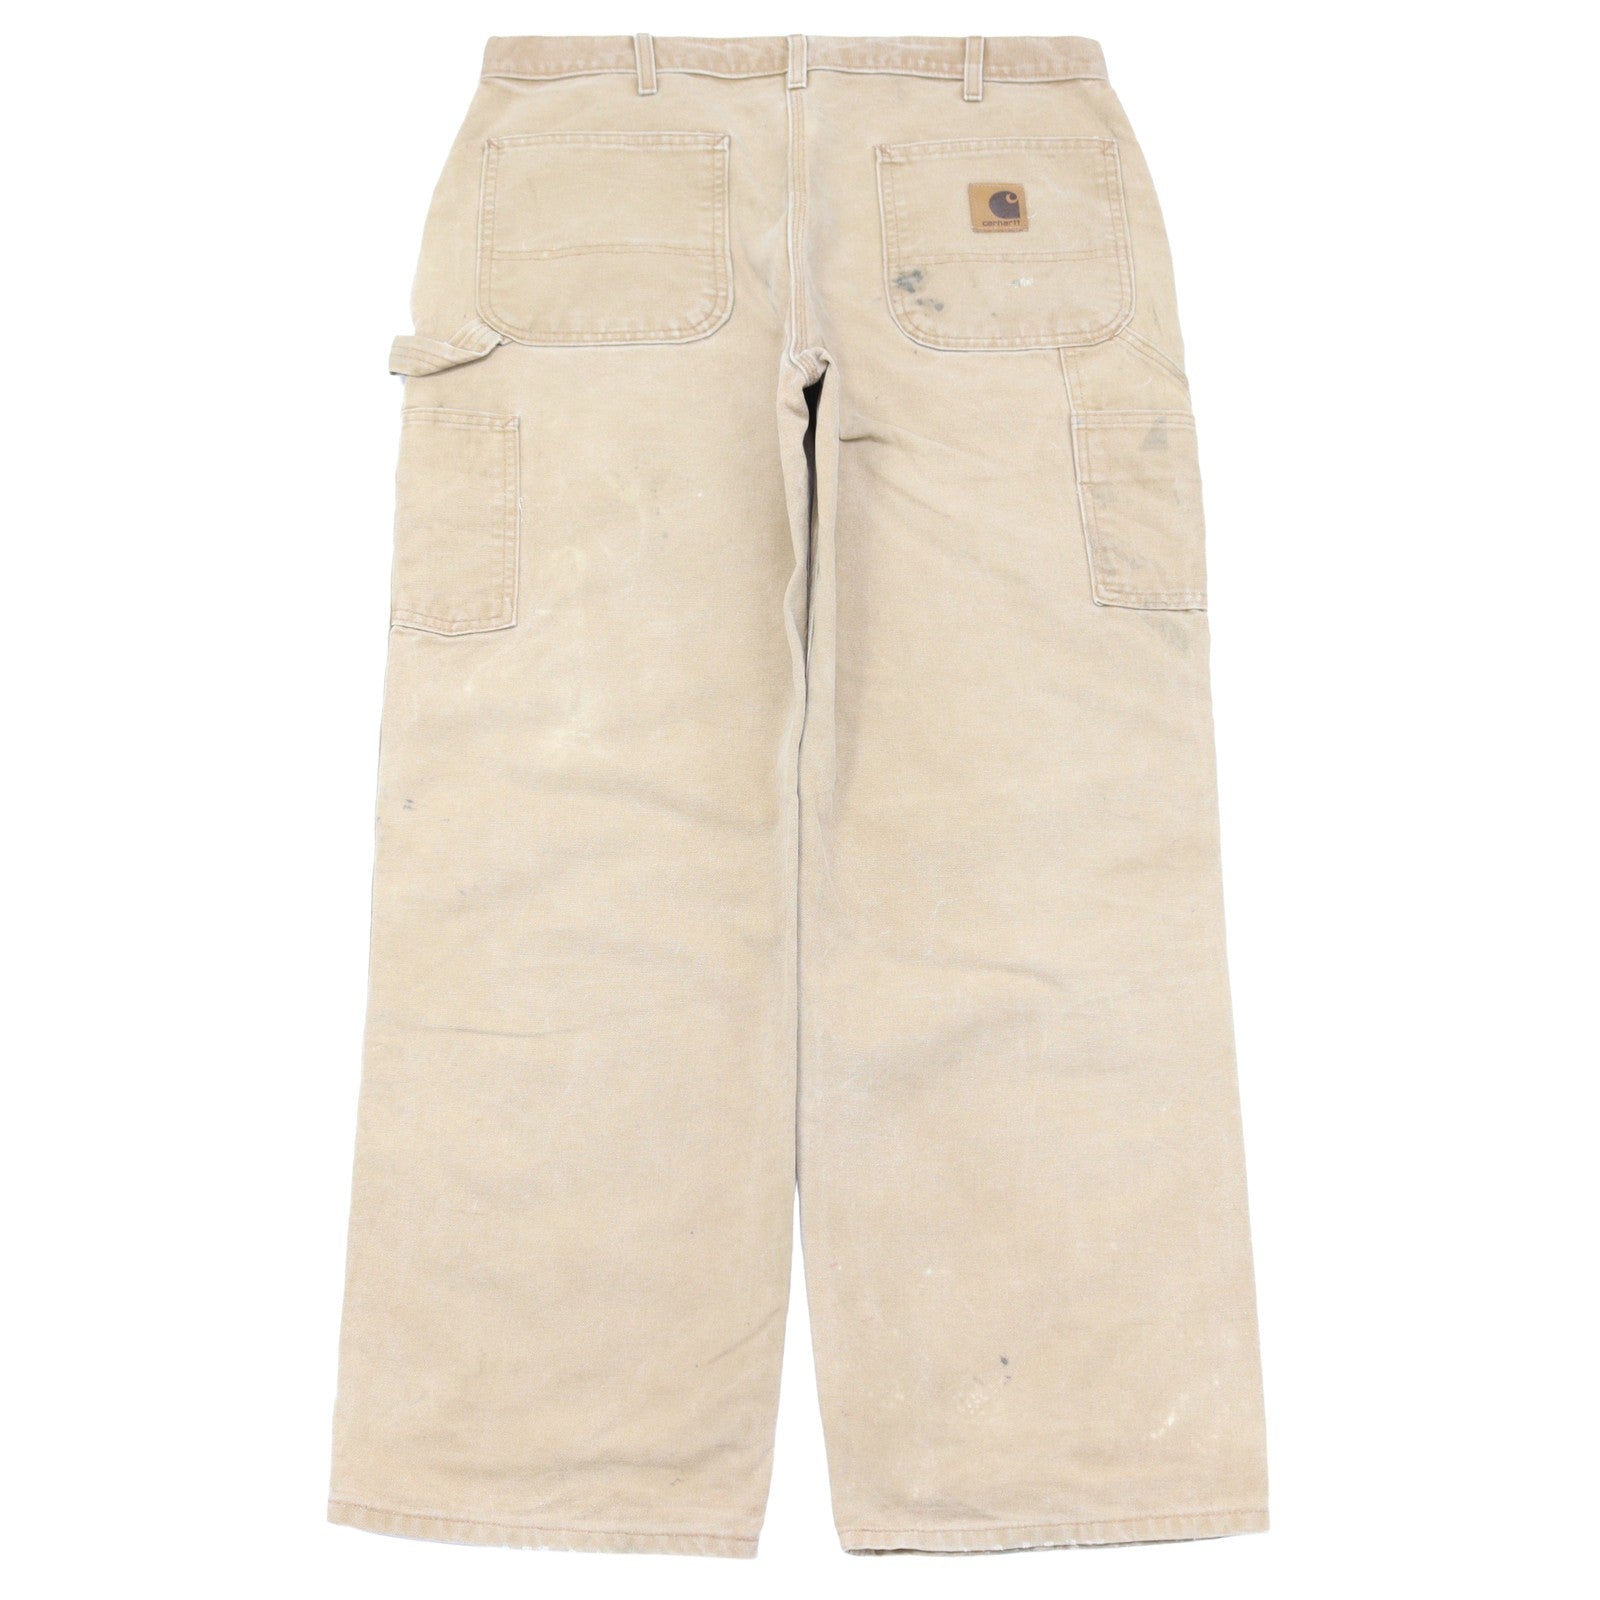 Carhartt Mens Multipocket Stitched Ripstop Cargo Pants Trousers | Brookes